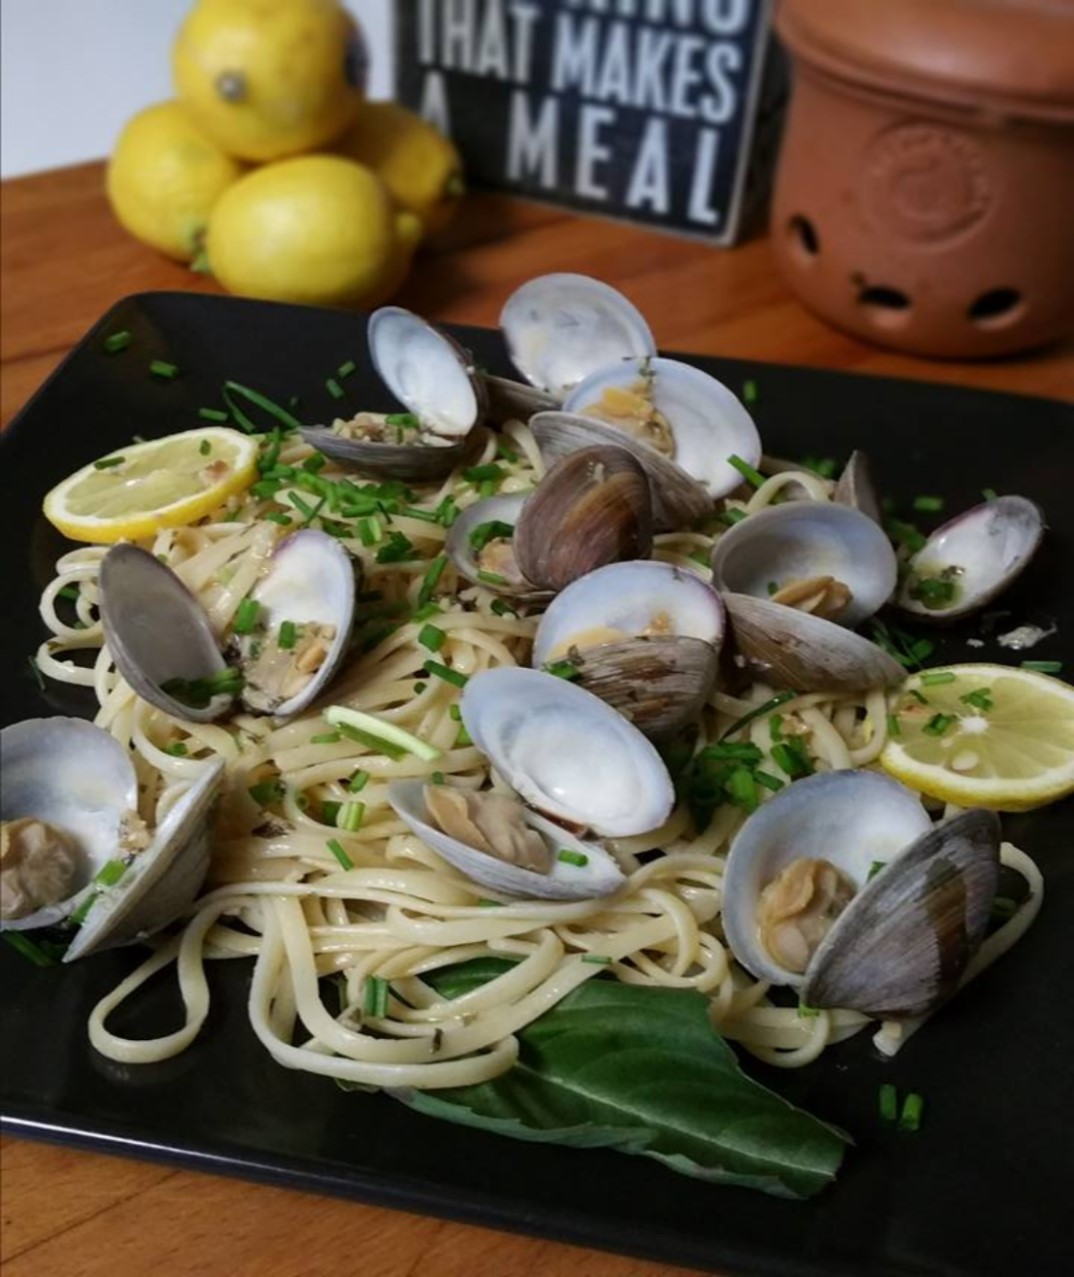 Linguine with Clams 